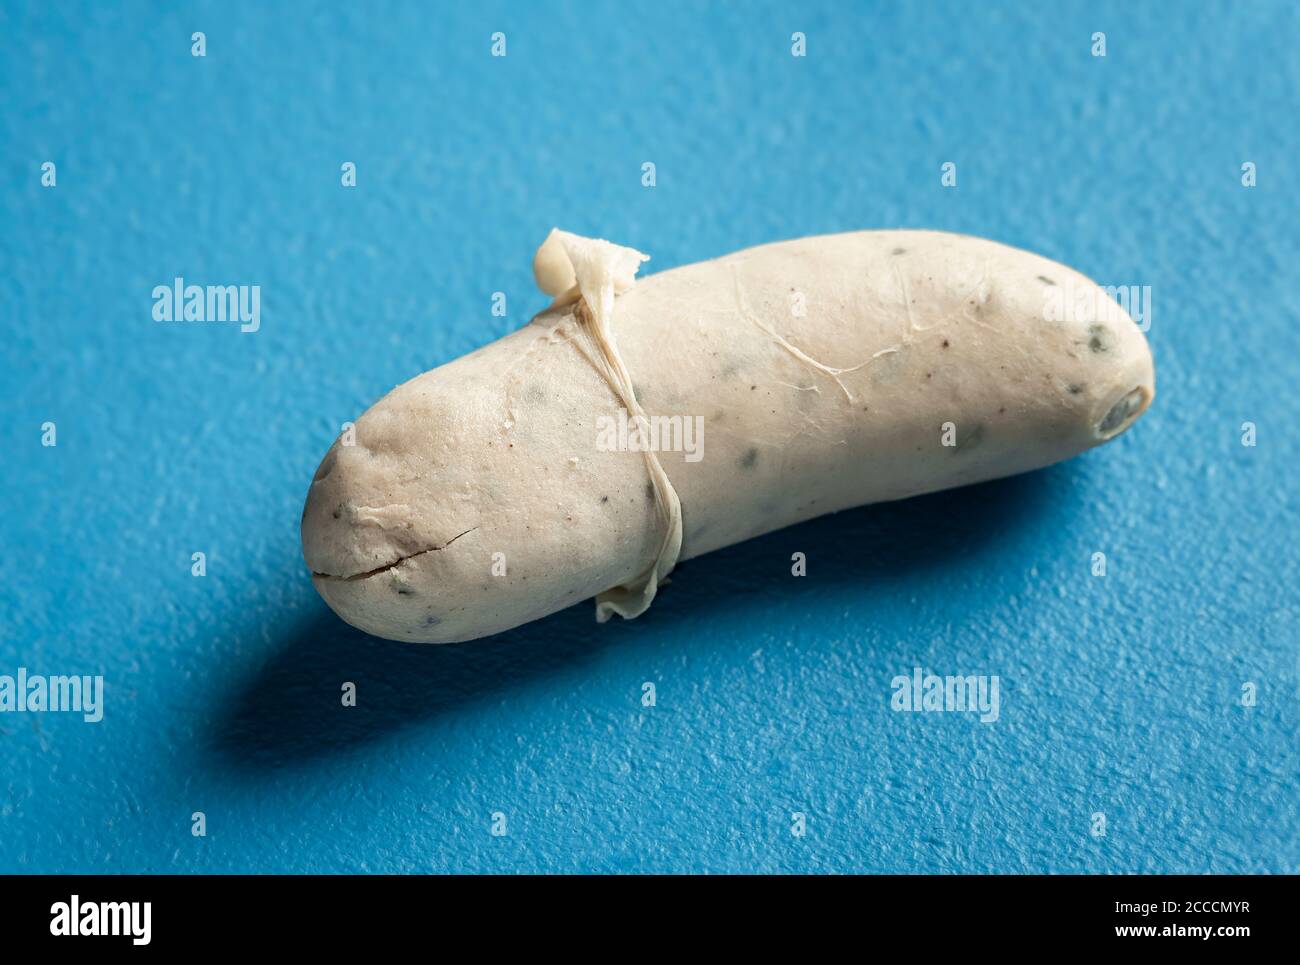 White sausage close-up with the skin peeled off, isolated on a blue background. Bavarian veal sausage. Traditional German food. Hot to eat weisswurst. Stock Photo